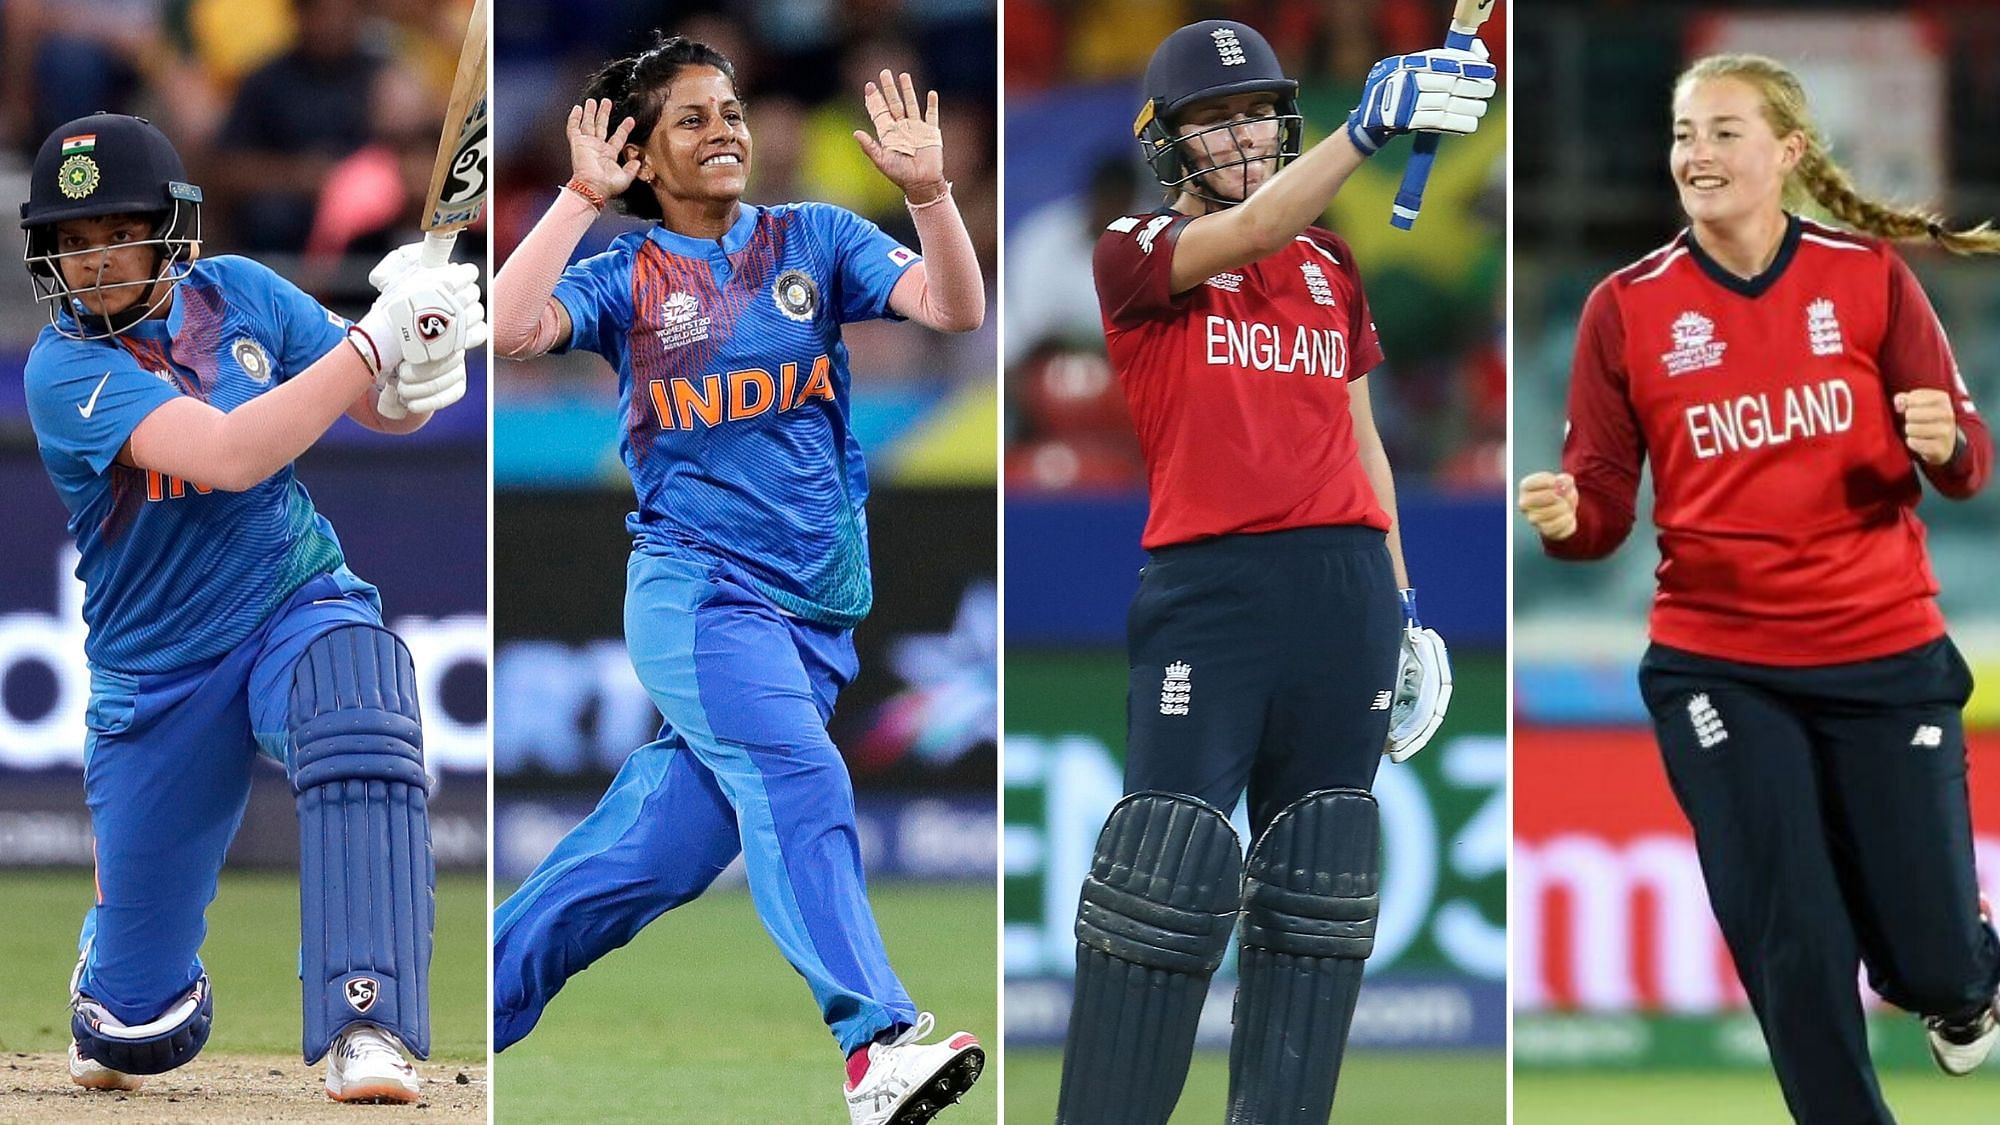 Shafali Verma and Poonam Yadav have led the charge for India while Natalie Sciver and Sophie Ecclestone have starred for England.